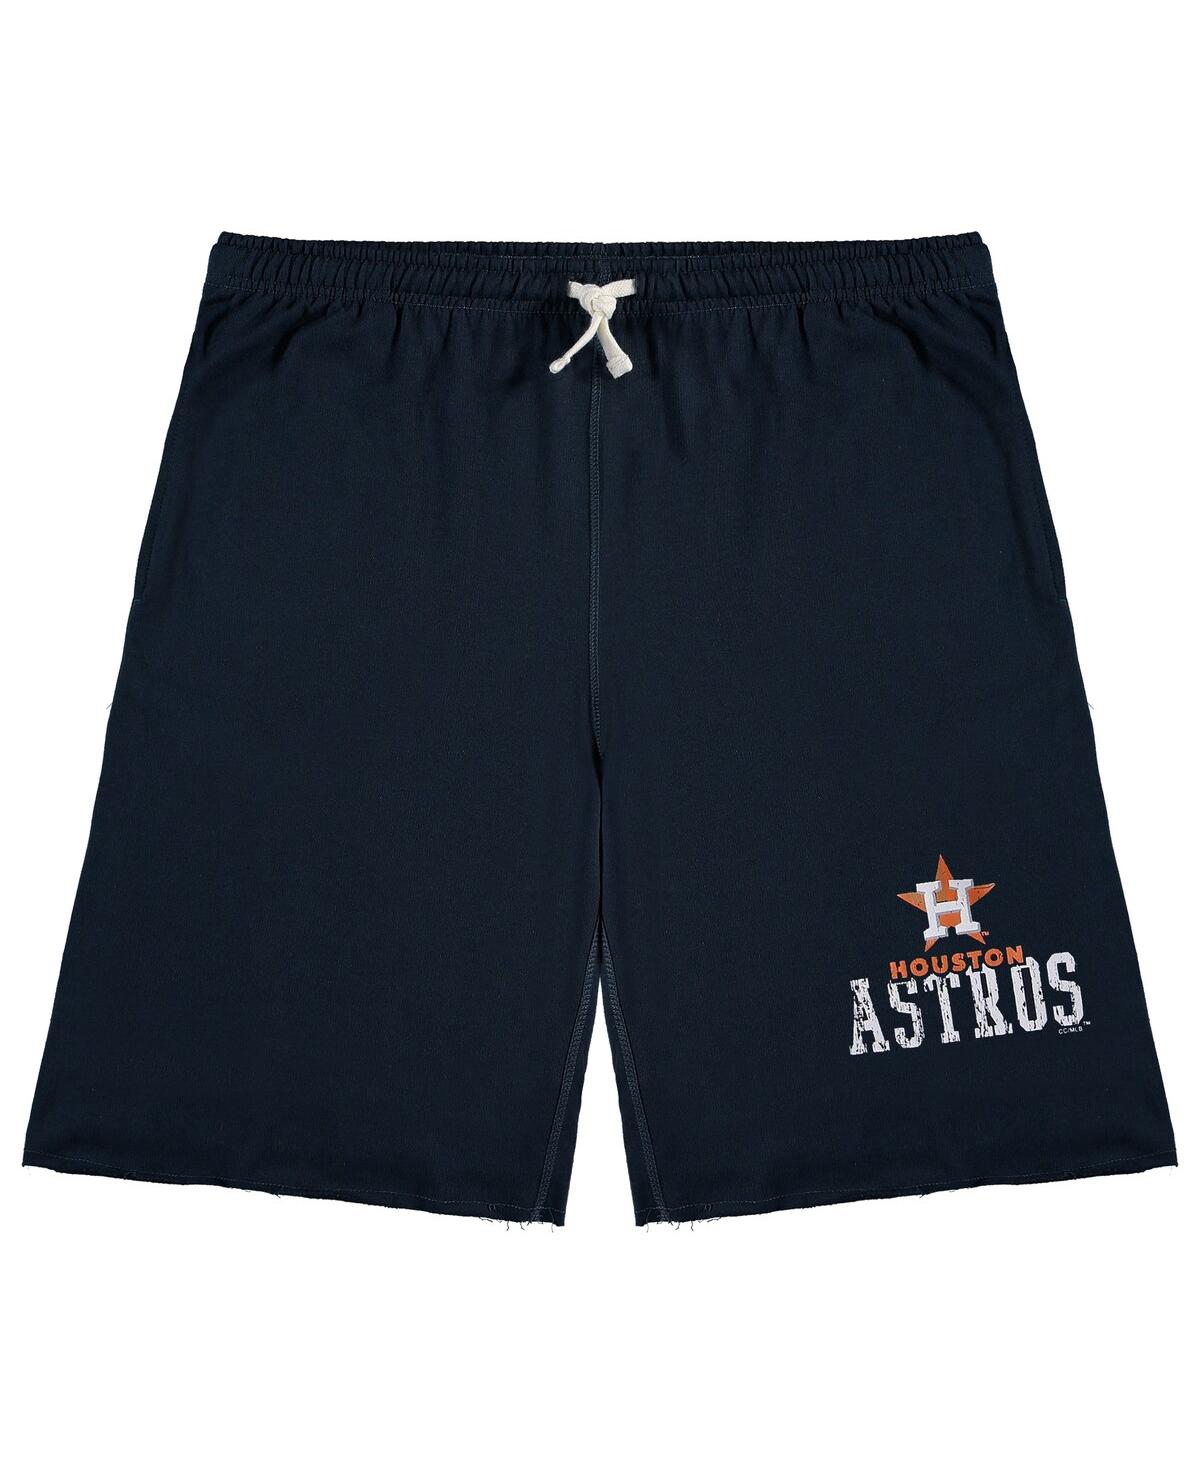 PROFILE MEN'S NAVY HOUSTON ASTROS BIG AND TALL FRENCH TERRY SHORTS